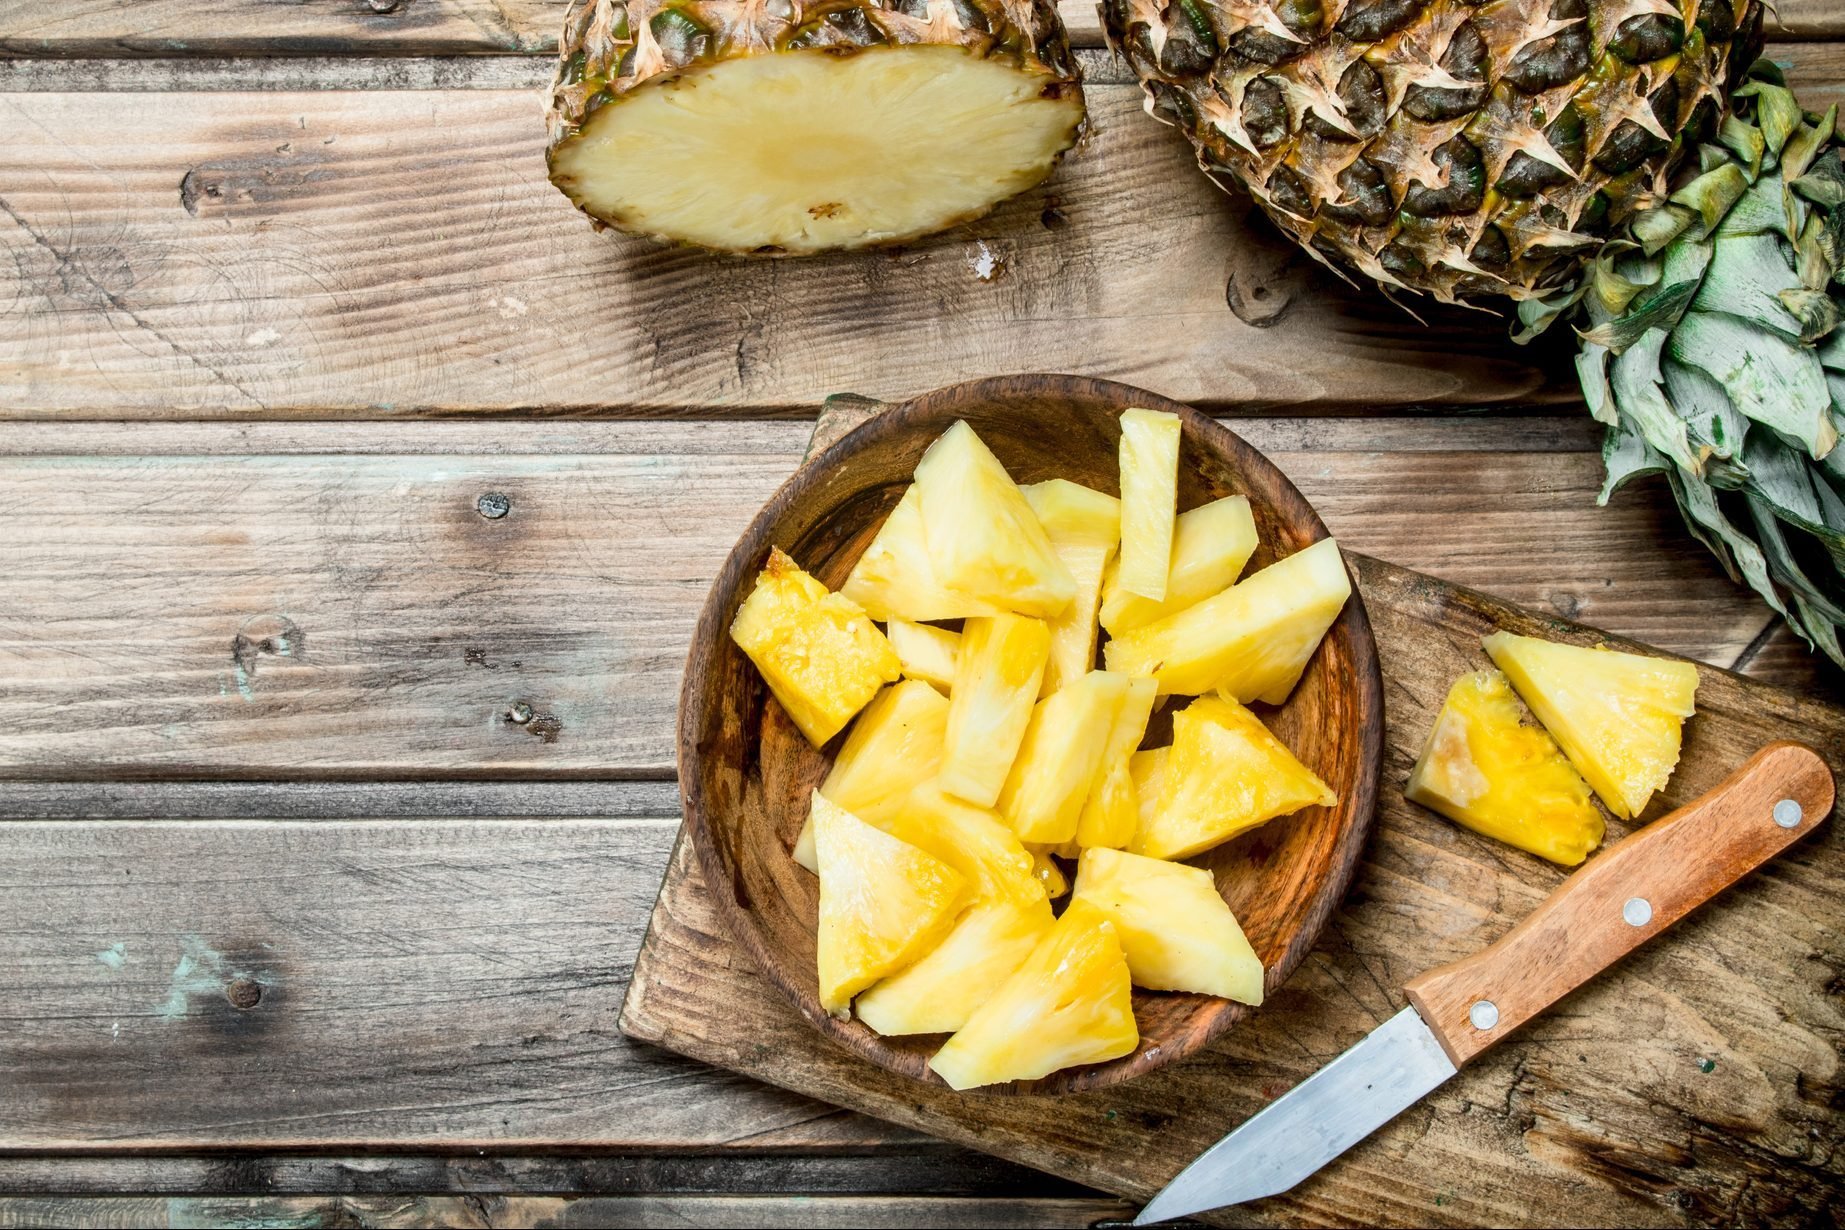 Is Pineapple Good for People With Diabetes?